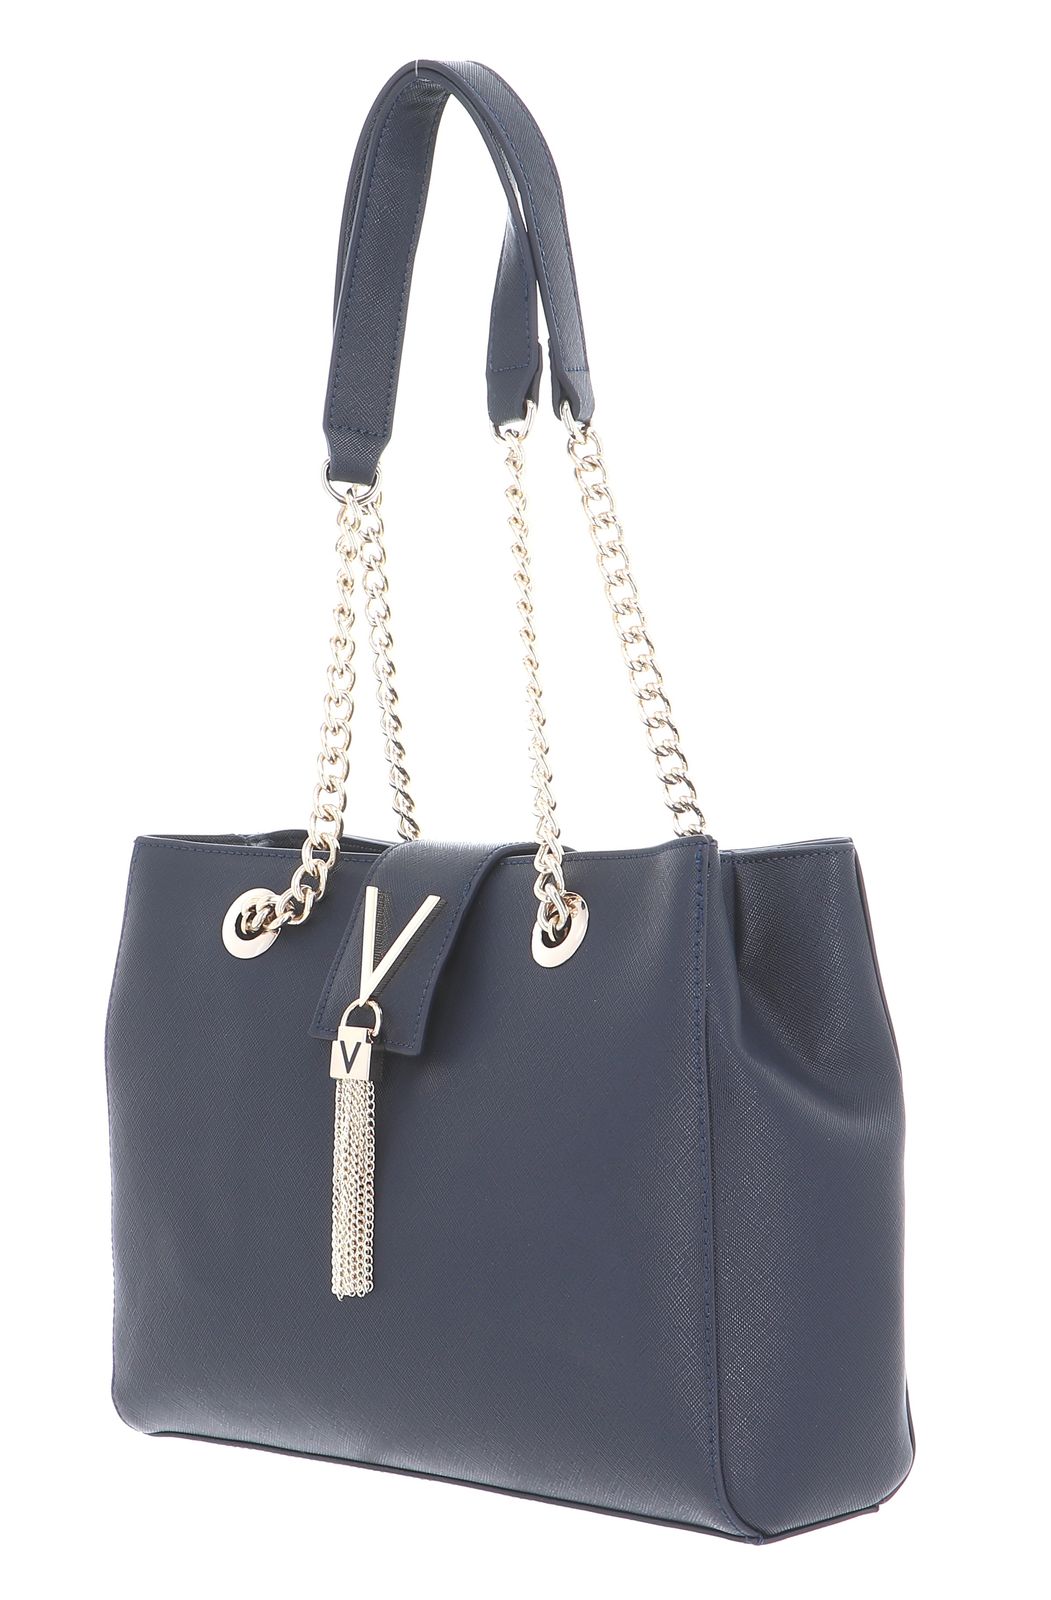 VALENTINO Tote Navy | Buy bags, purses & accessories online | modeherz